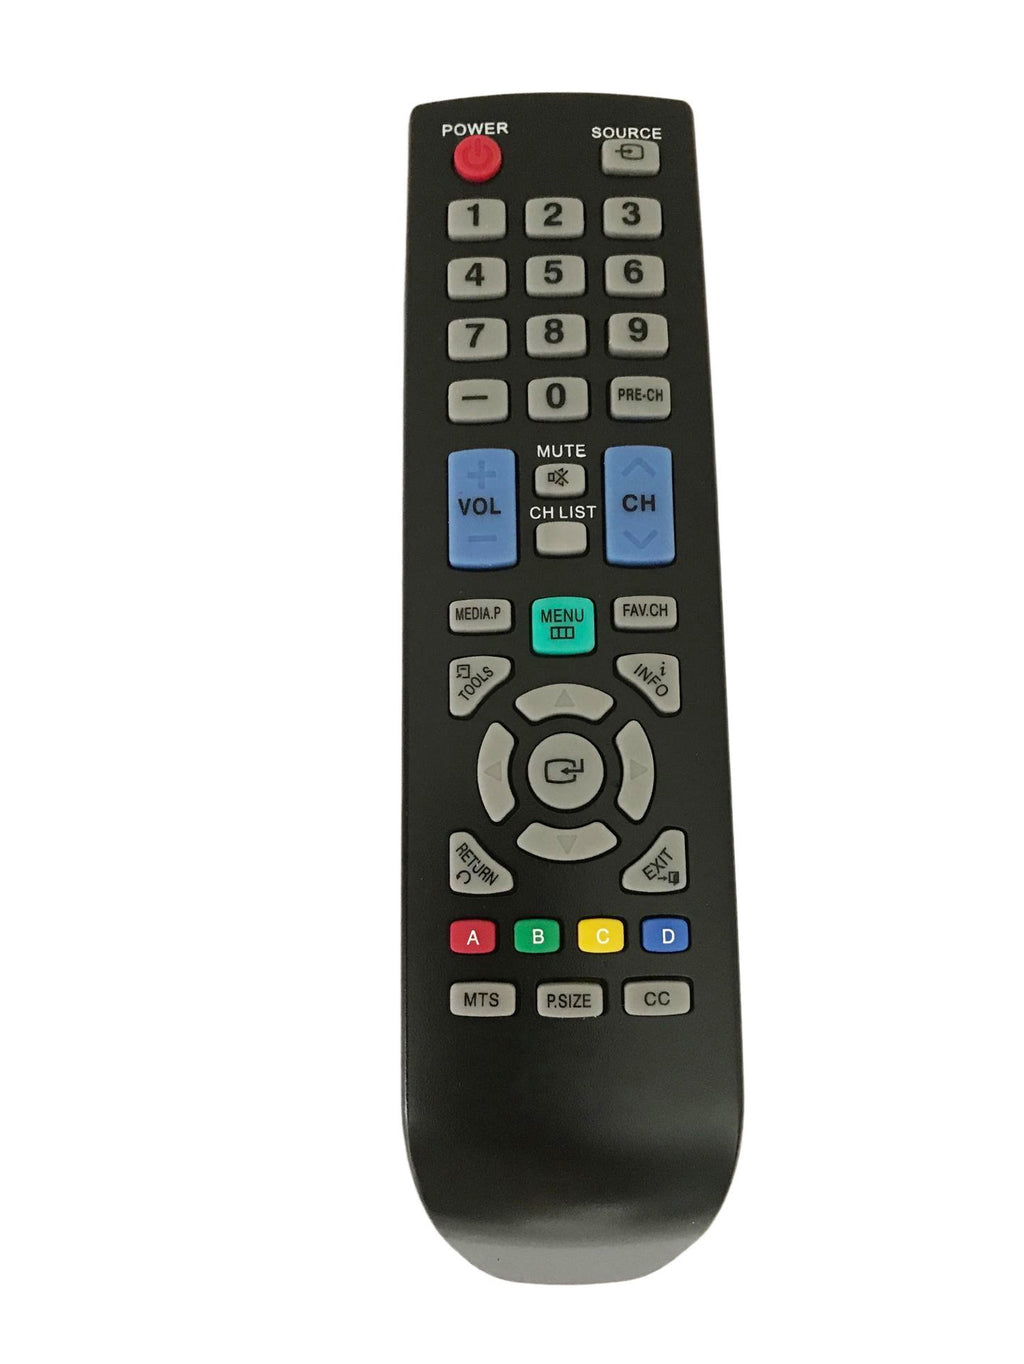 Replacement Remote Controller use for LN32D405E3D LN32D403E2DXZASP03 LN32D403E4D LN32D403E4DX LN32D405E3DXZA Samsung TVs